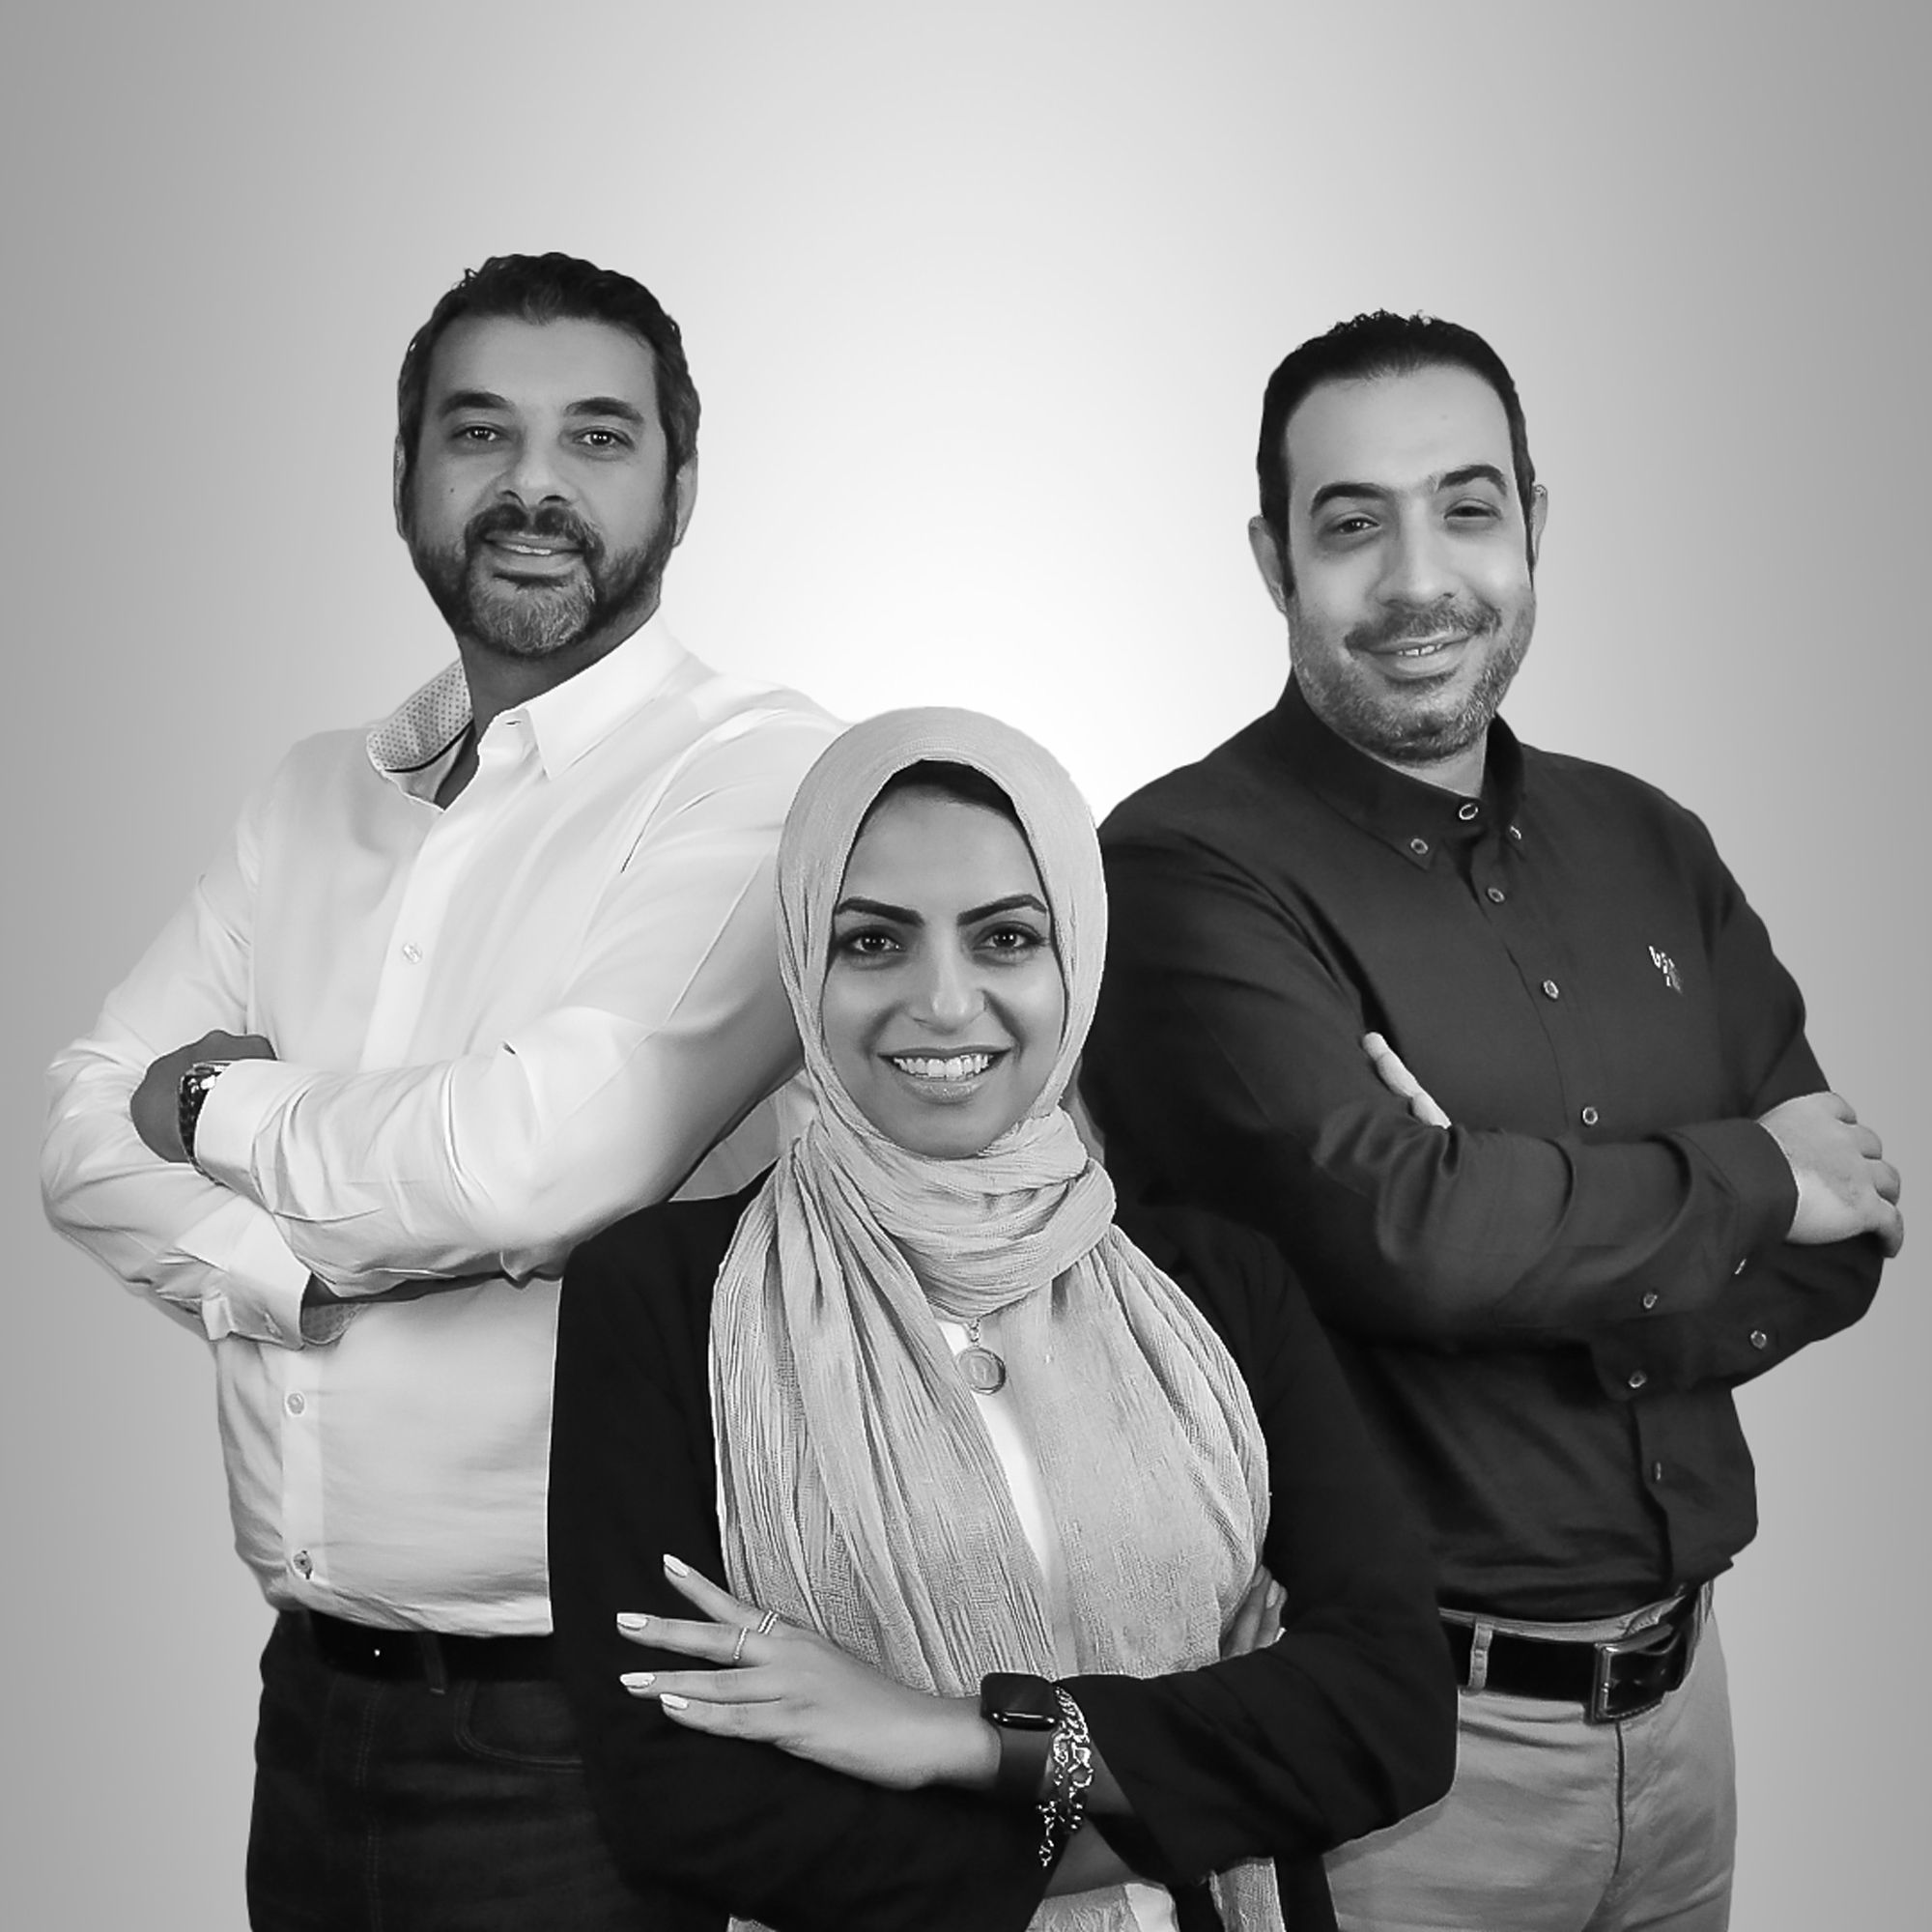 Egyptian healthtech startup Esaal secures $1.7 million in funding